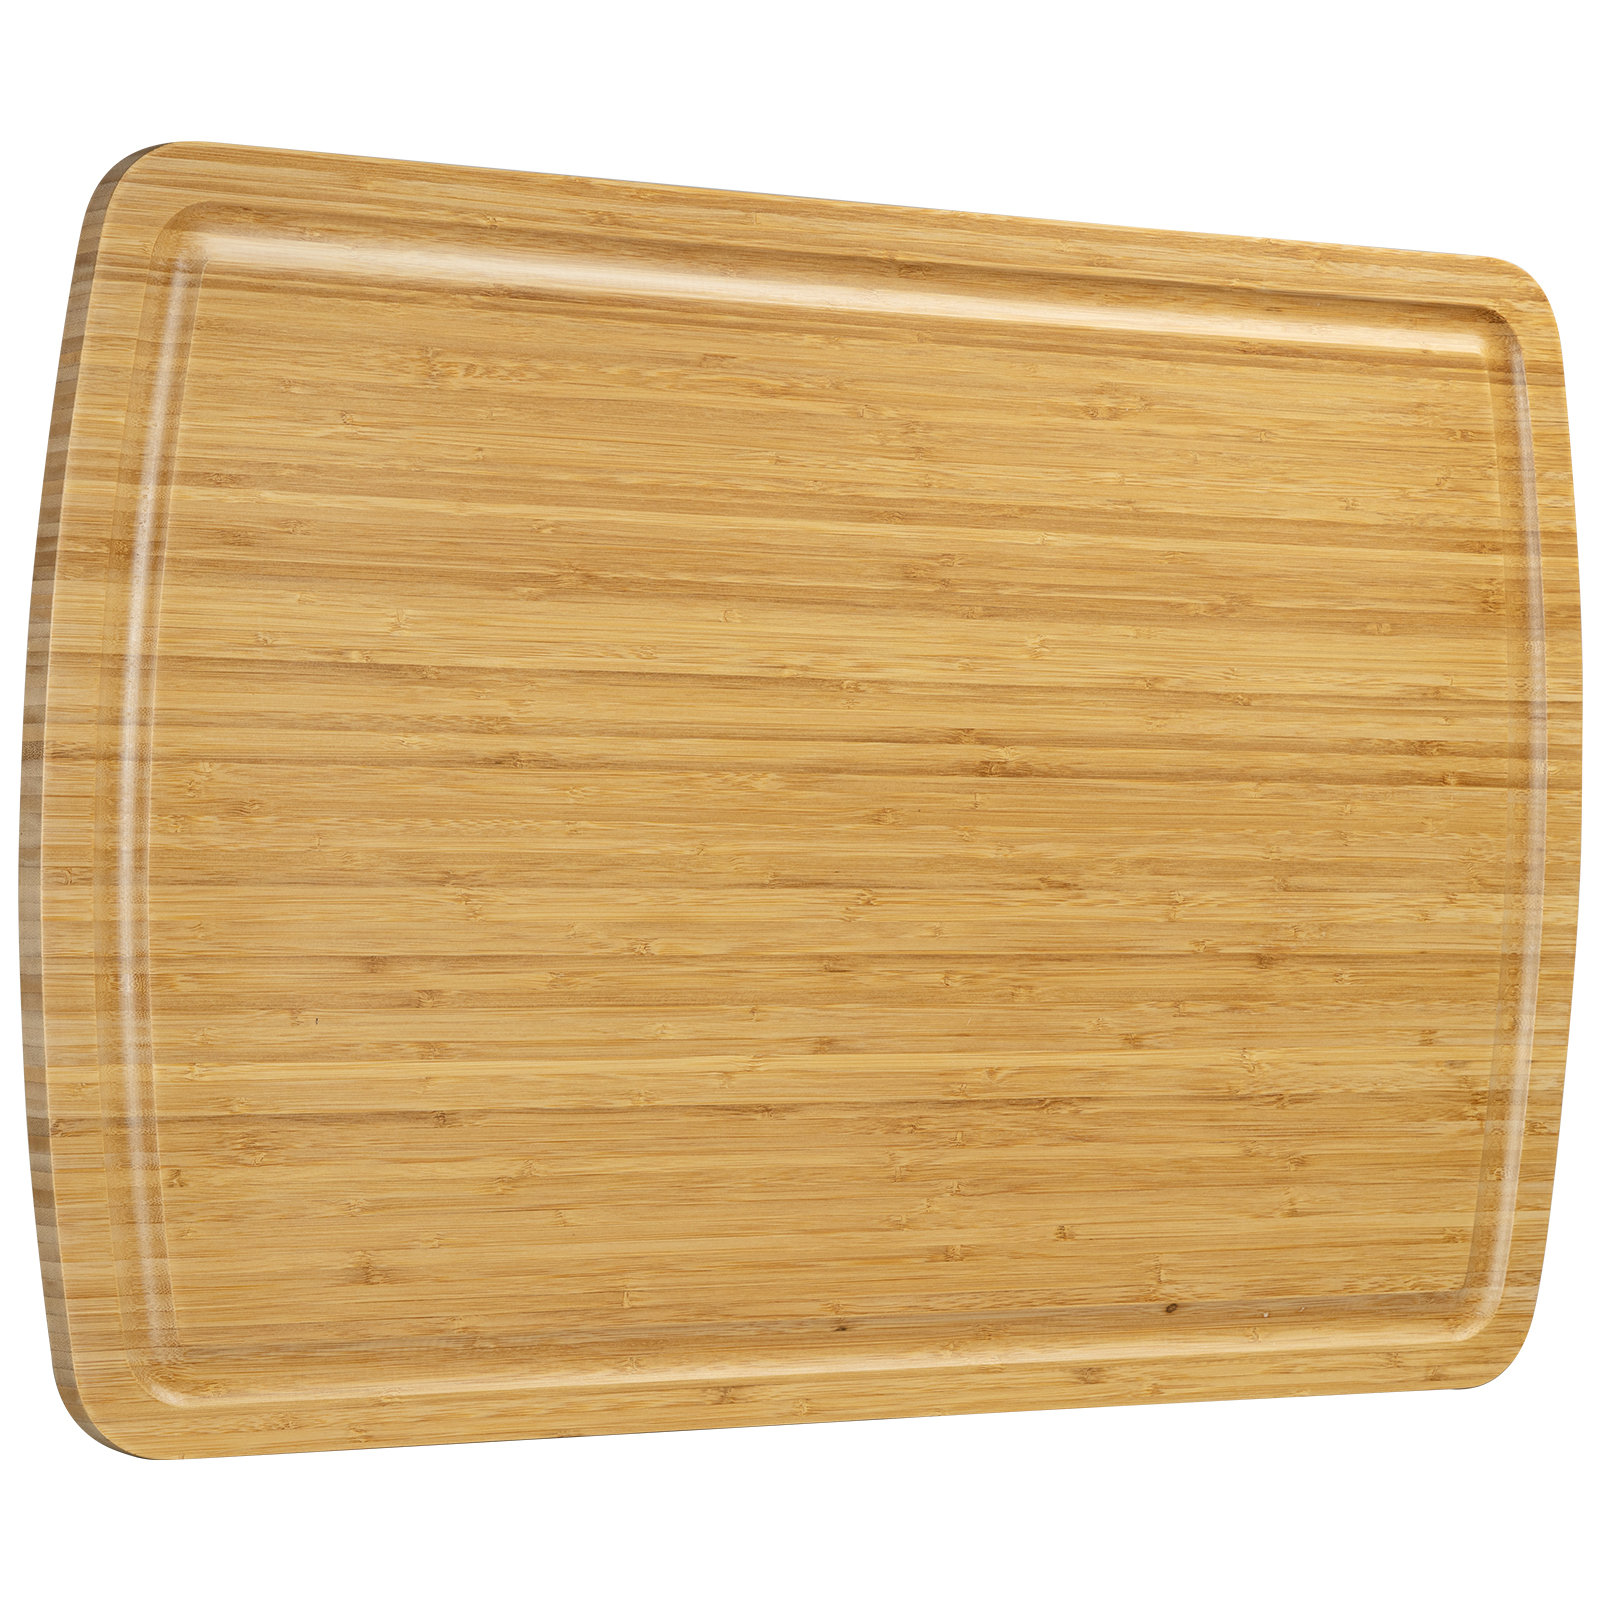 Large Walnut Wood Thick Cutting Board, Solid Edge Grain BBQ Cutting Board,  Nice Gift for Friends 